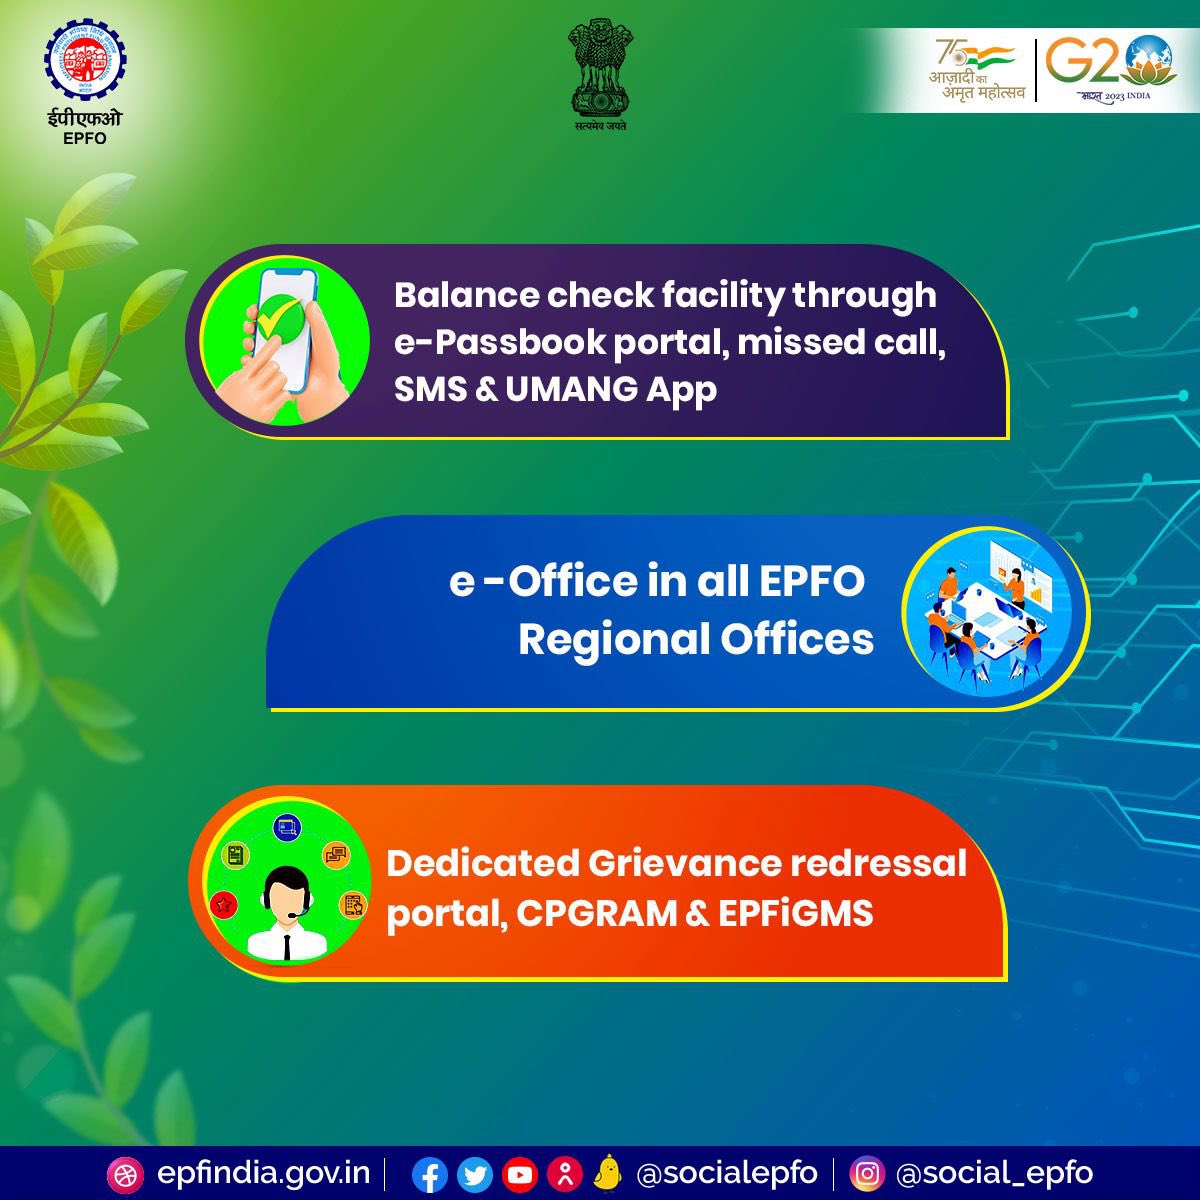 Today is #WorldEnvironmentDay , Let’s start small… Go Digital, Go Green.

#EPFOwithyou #AmritMahotsav #MissionLiFE #ChooseLiFE #EnvironmentDay

@PMOIndia @byadavbjp @Rameswar_Teli @LabourMinistry @moefcc @PIB_India @MIB_India @_DigitalIndia